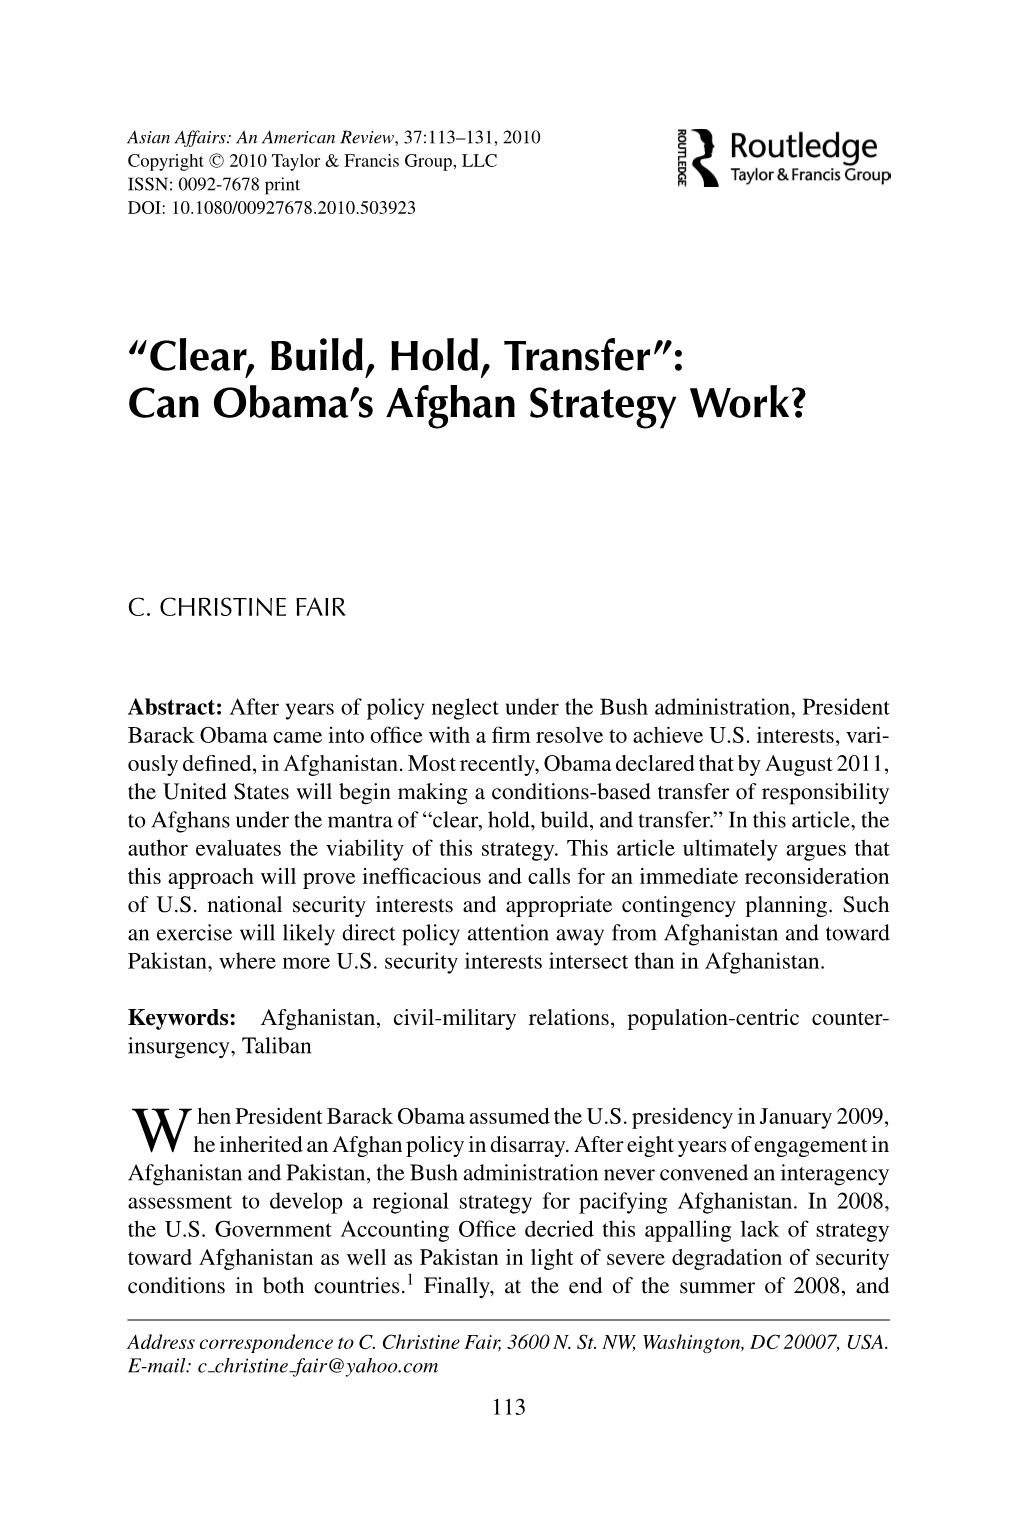 “Clear, Build, Hold, Transfer”: Can Obama's Afghan Strategy Work?